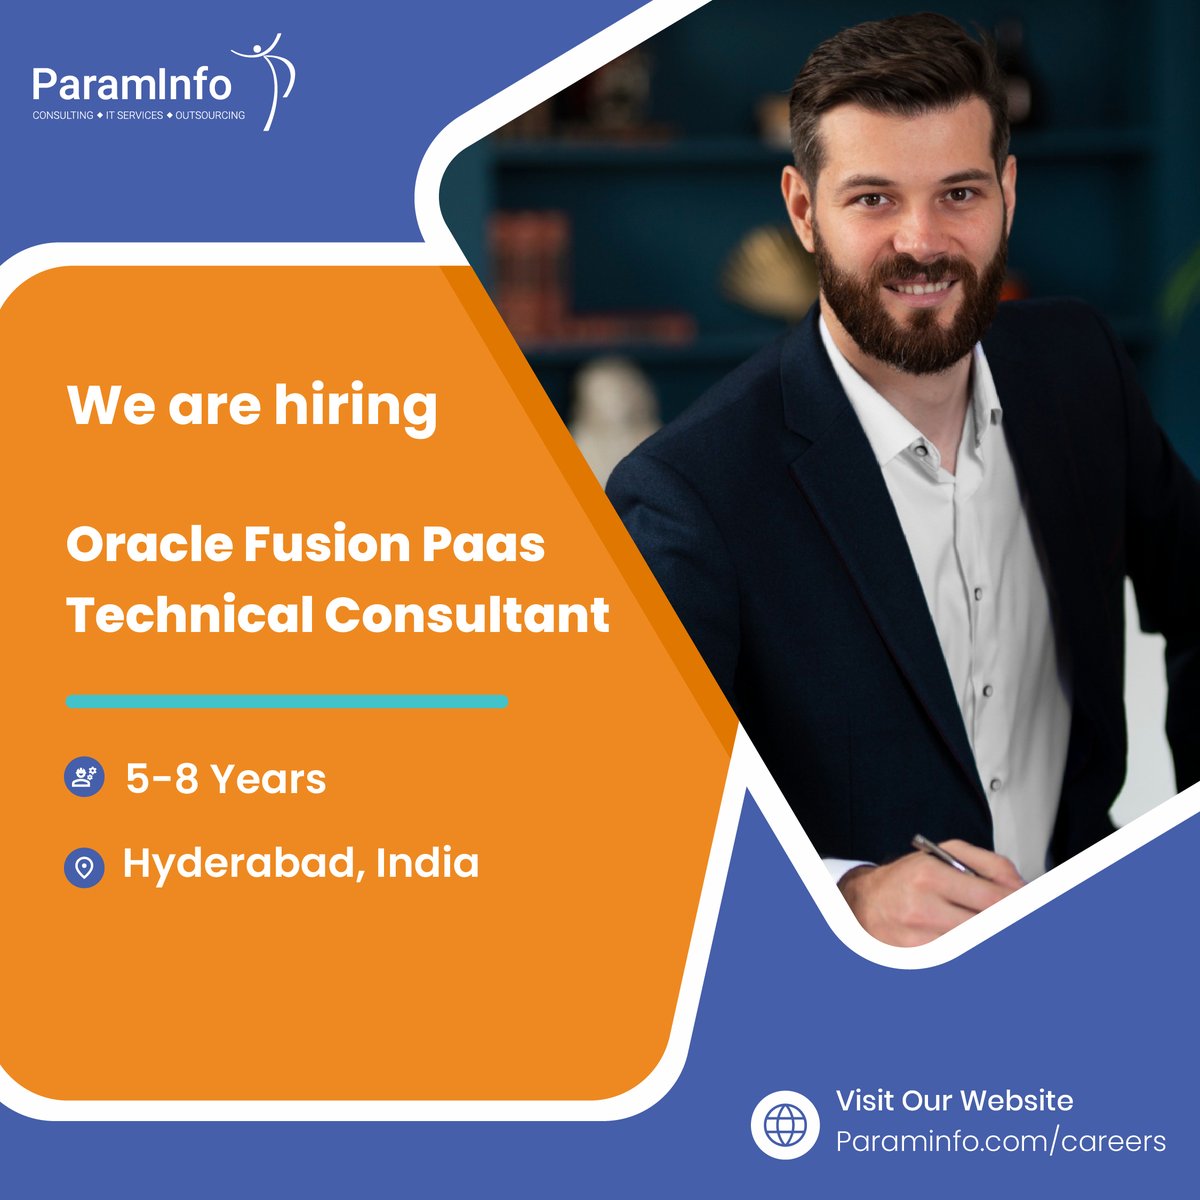 𝐉𝐨𝐛 𝐓𝐢𝐭𝐥𝐞: Oracle Fusion Paas Technical Consultant 📢
𝐀𝐩𝐩𝐥𝐲 𝐍𝐨𝐰:  bit.ly/3QcG2C0 👈
𝐄𝐱𝐩𝐞𝐫𝐢𝐞𝐧𝐜𝐞: 5 - 8 Years
𝐋𝐨𝐜𝐚𝐭𝐢𝐨𝐧: Hyderabad, India
#paas #oraclefusion #fusionpaas #technicalconsultant #OIC #VBCS #APEX #PCS #processcloudservice